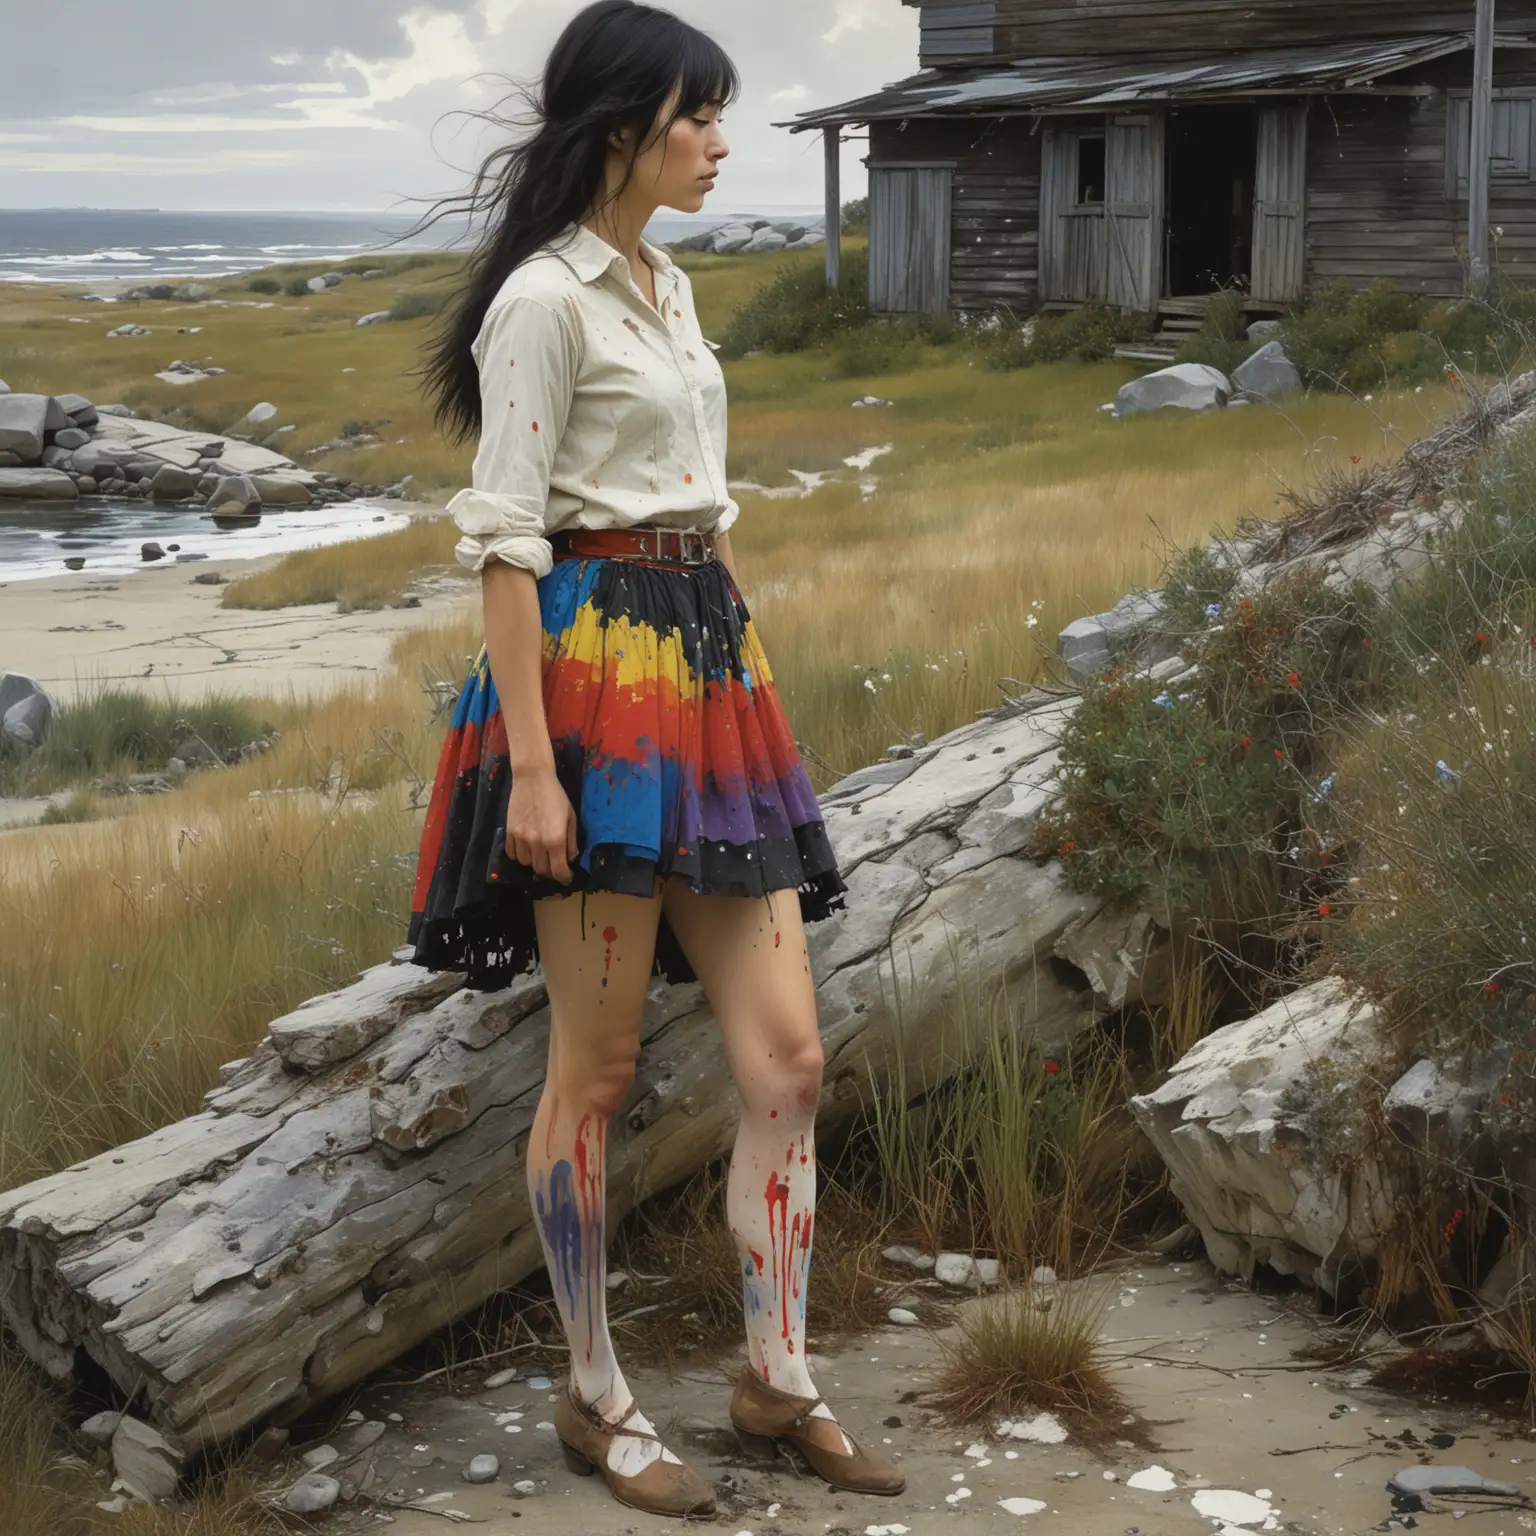 Mexican Woman in Colorful Skirt Painting on Oregon Shoreline at Evening by Andrew Wyeth